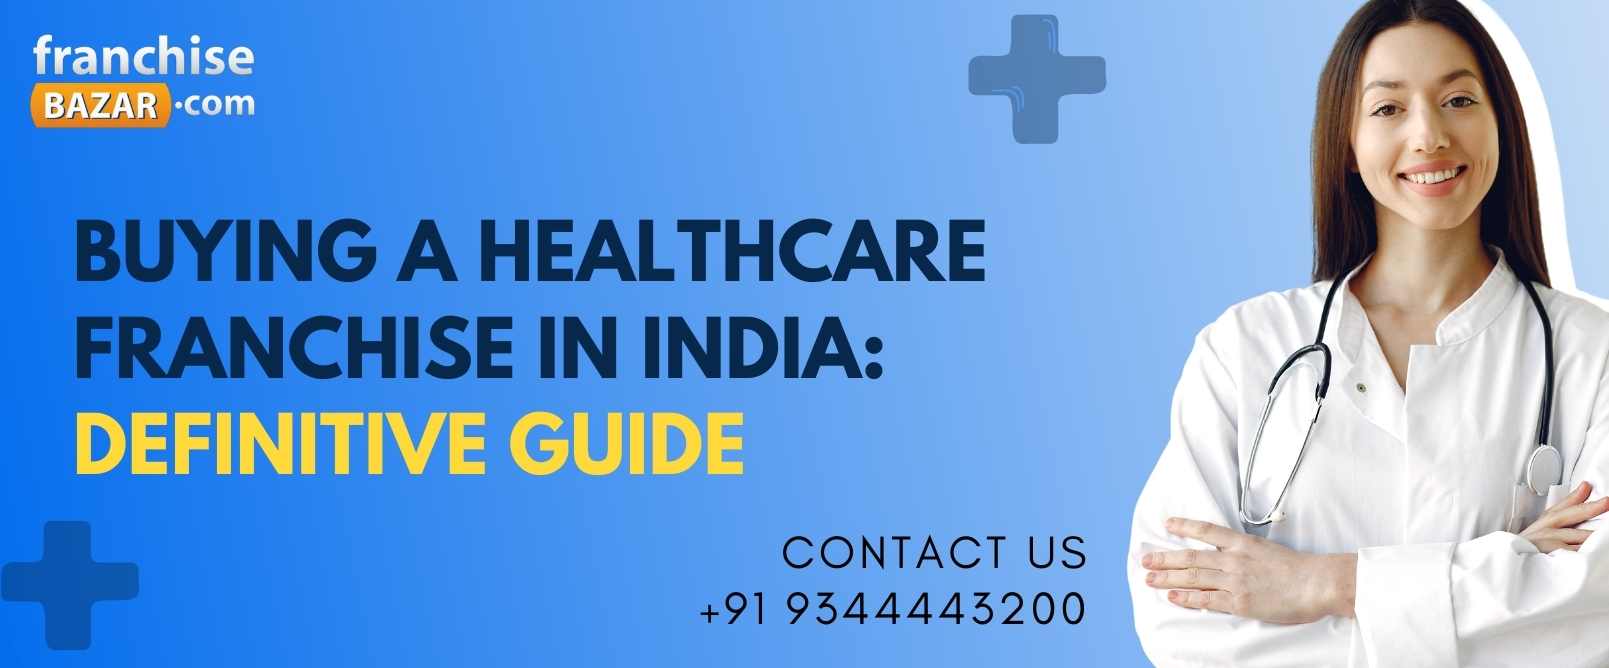 Buying A Healthcare Franchise In India: Definitive Guide	